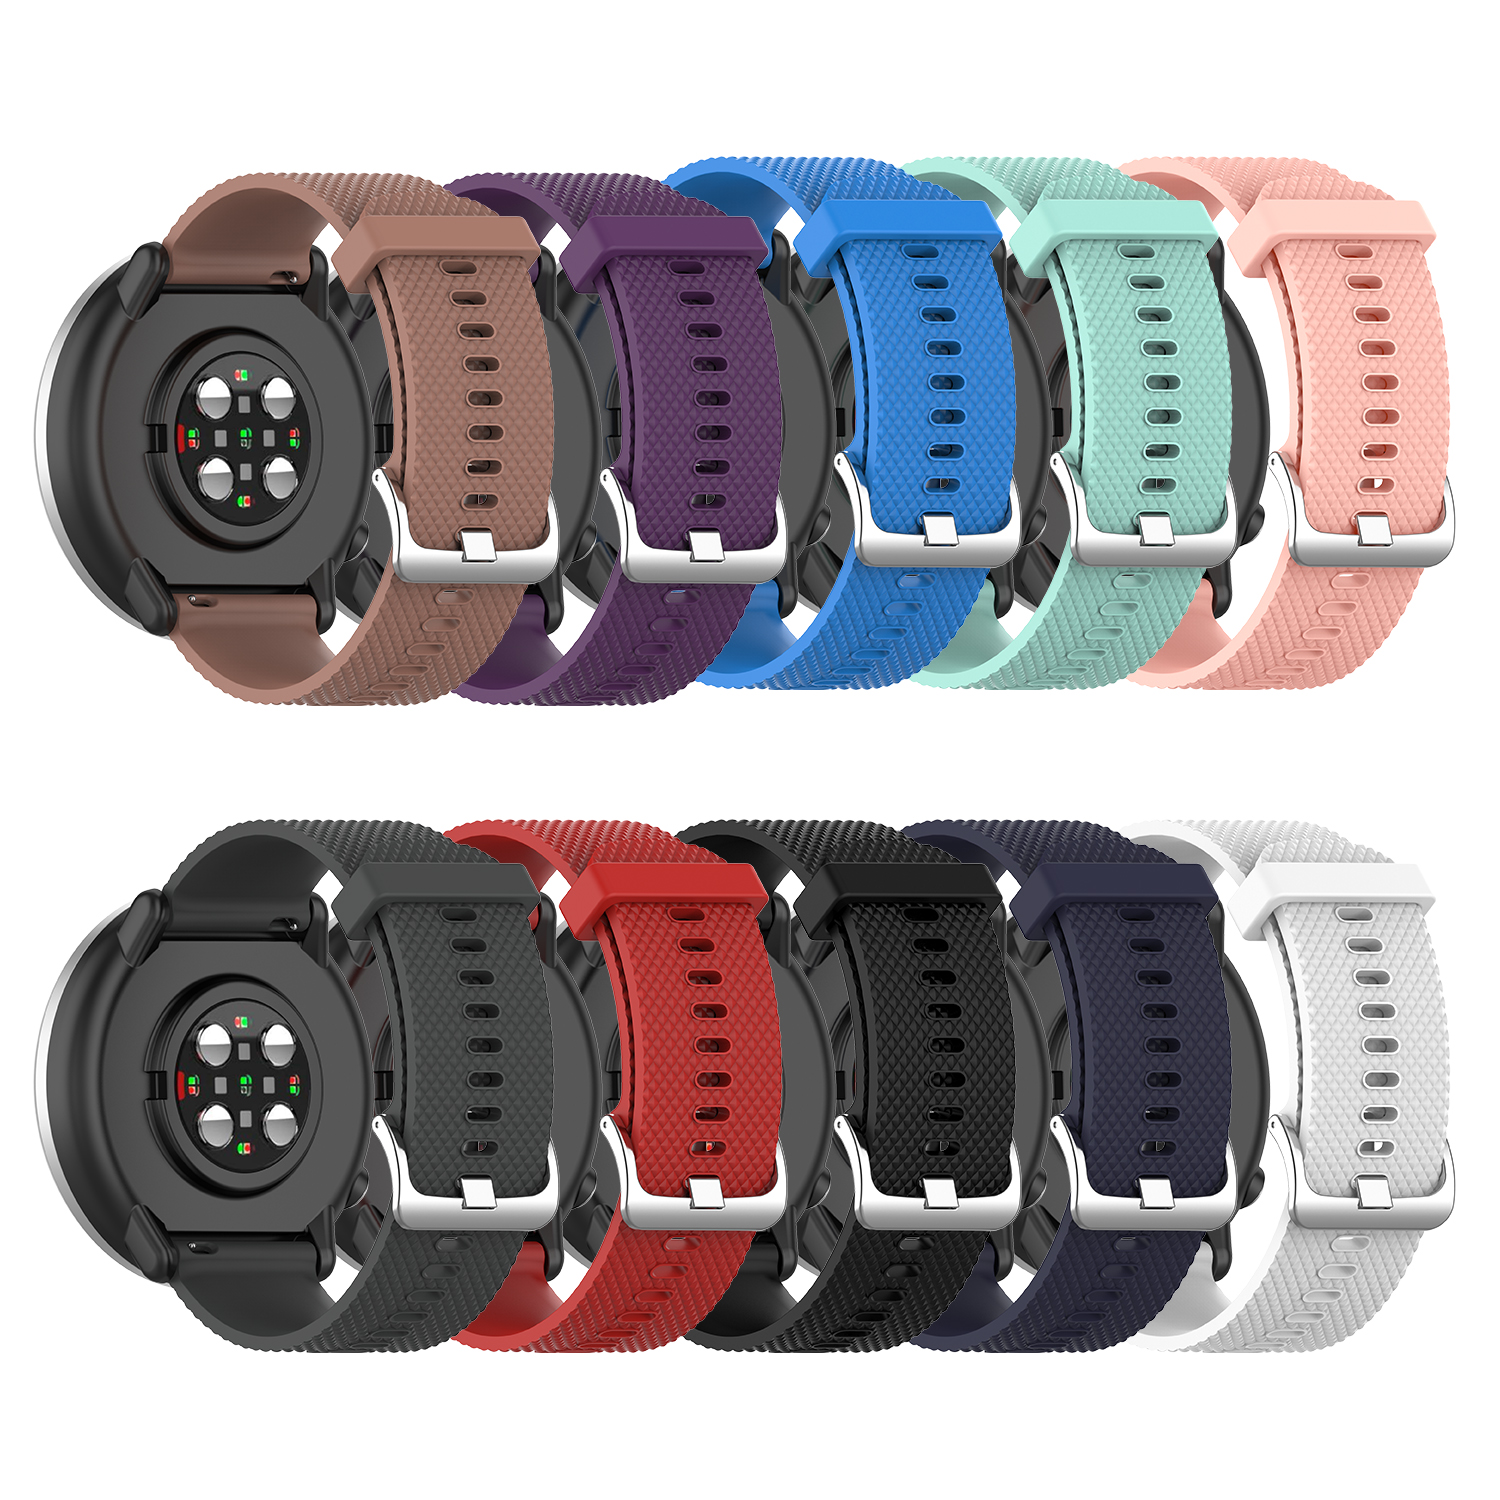 Bakeey-20mm-Silicone-Texture-Multi-color-Replacement-Strap-Smart-Watch-Band-For-POLAR-Ignite-1739061-2